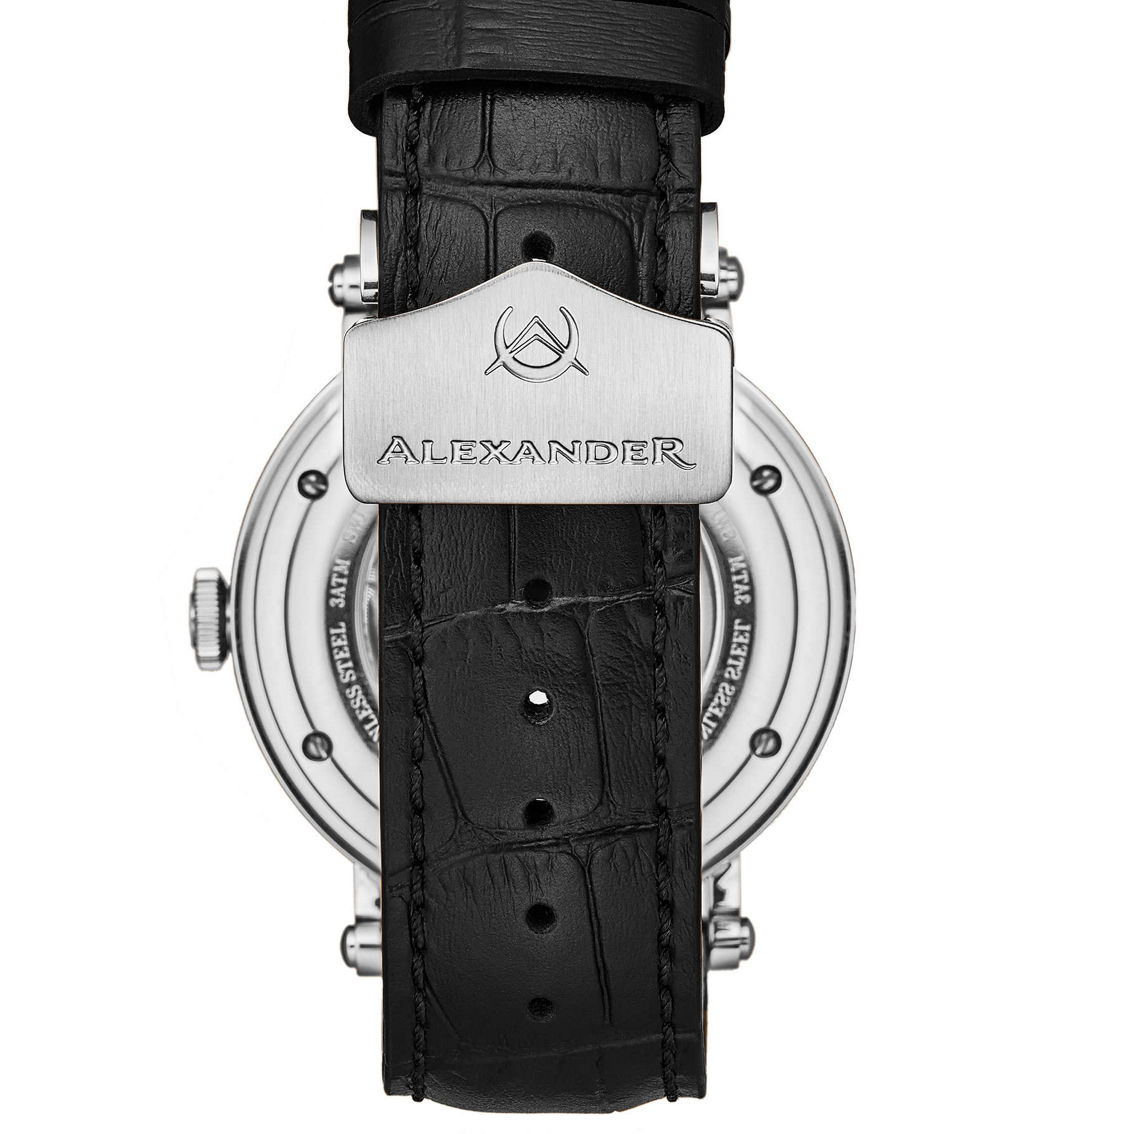 Alexander Swiss Made Classic A153 - Image 2 of 3